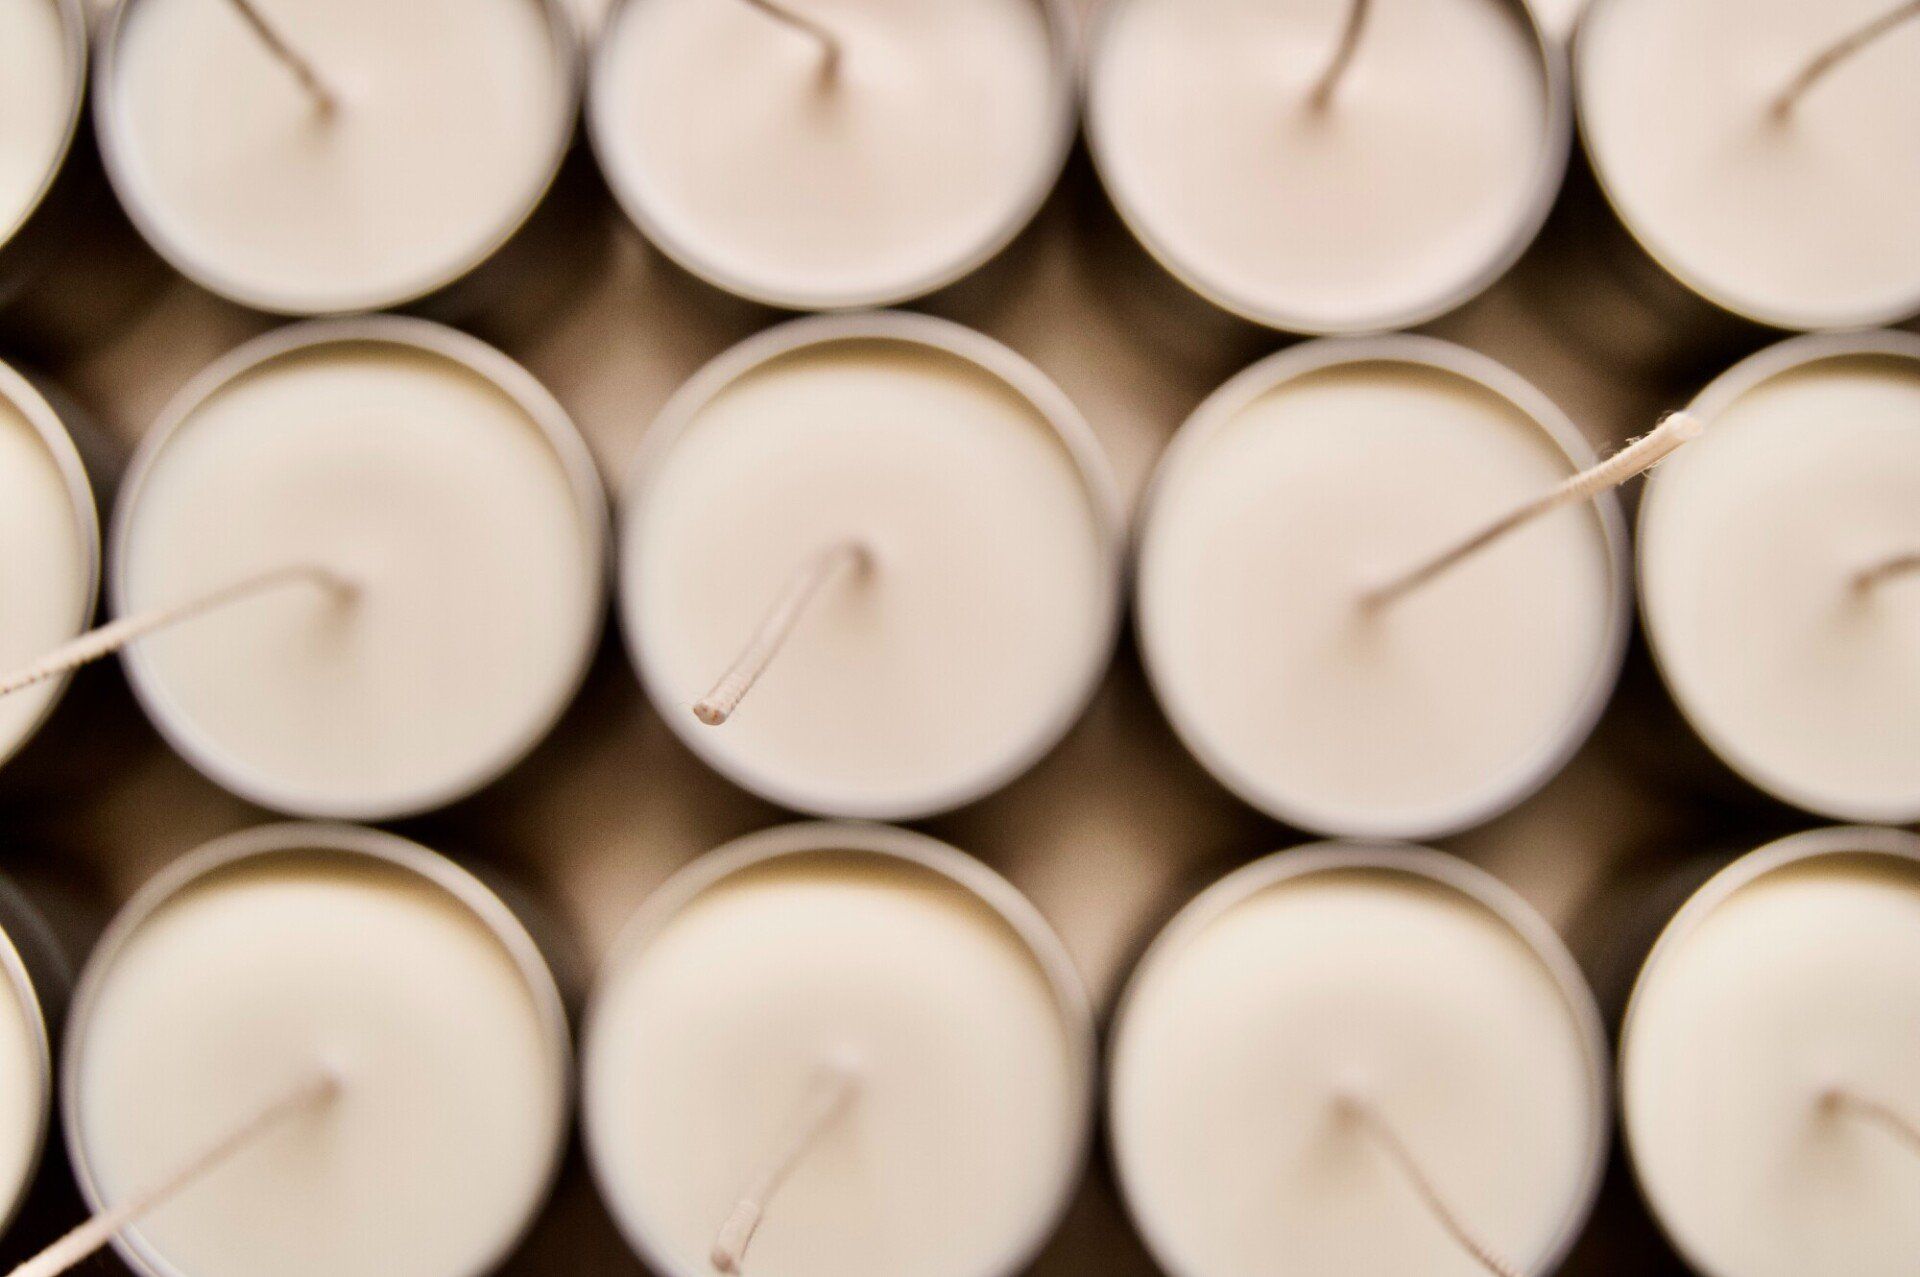 Abundant Flame | What Are the Benefits of Soy Candles? A Closer Look